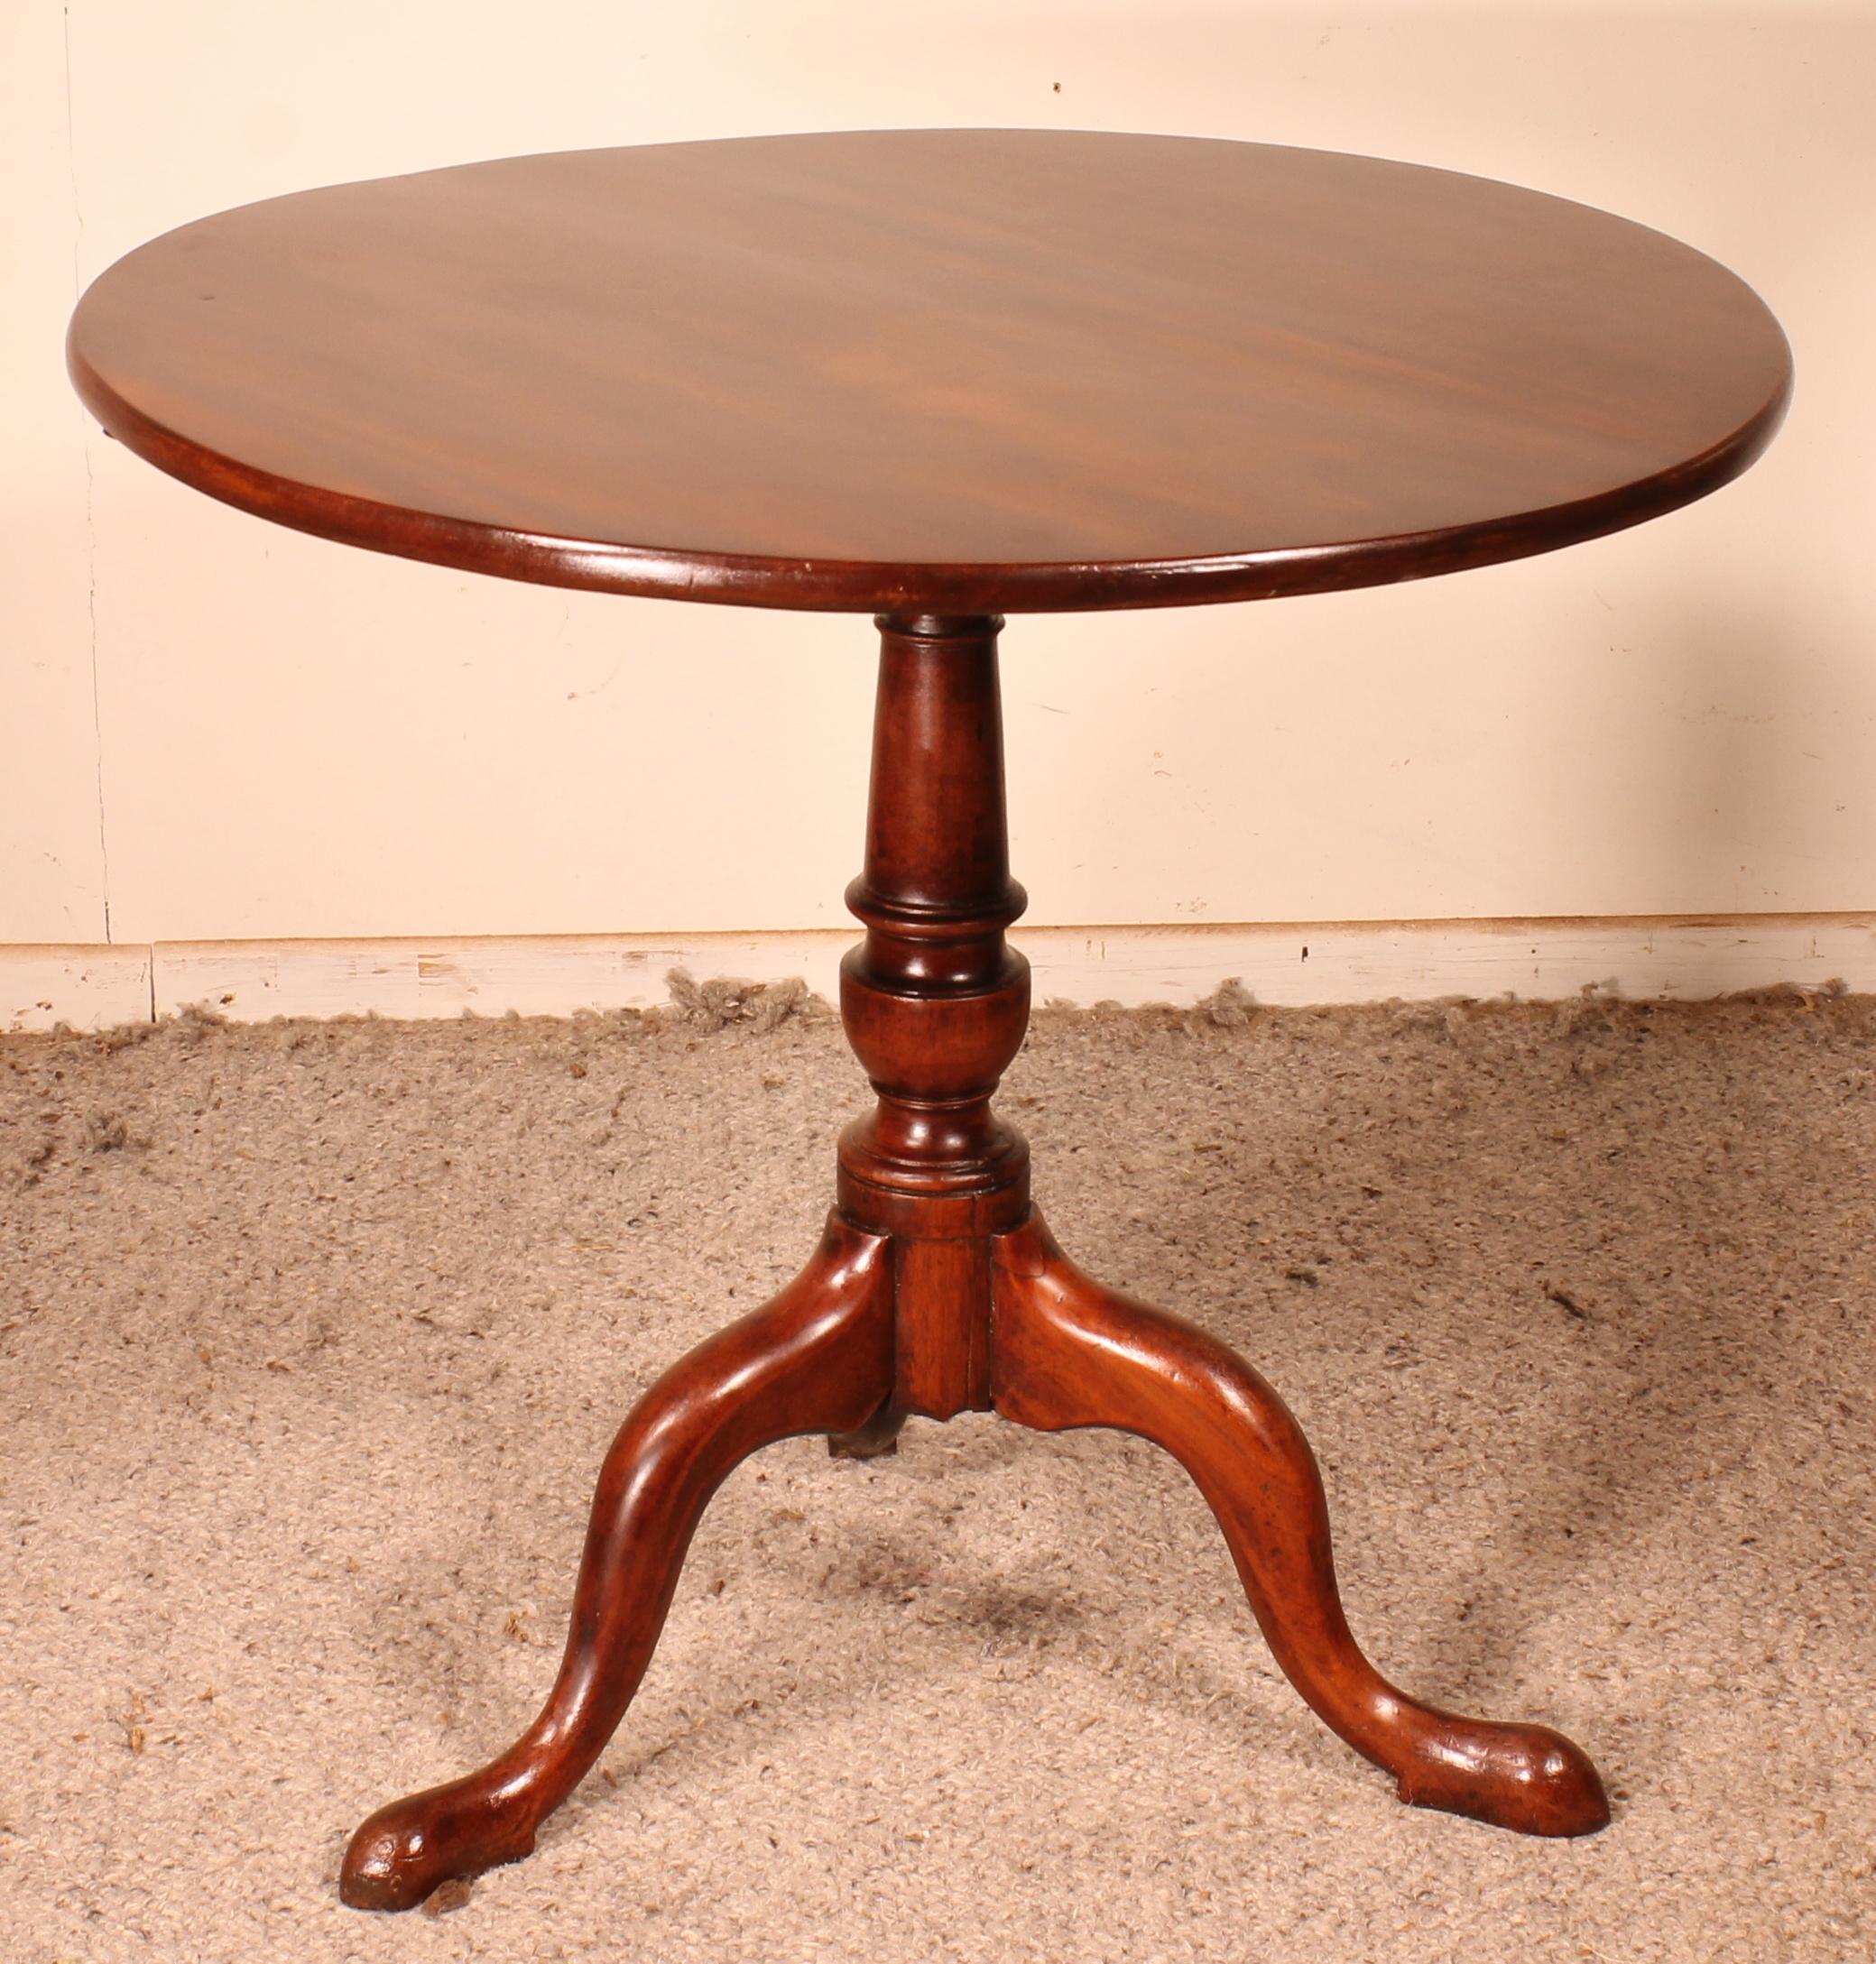 Elegant 19th century English tripod table in solid mahogany.
Beautiful one piece solid mahogany top with a diameter of 75m. Very beautiful flame
Tripod base with elegant turning
Very beautiful patina and in superb condition
It has his old